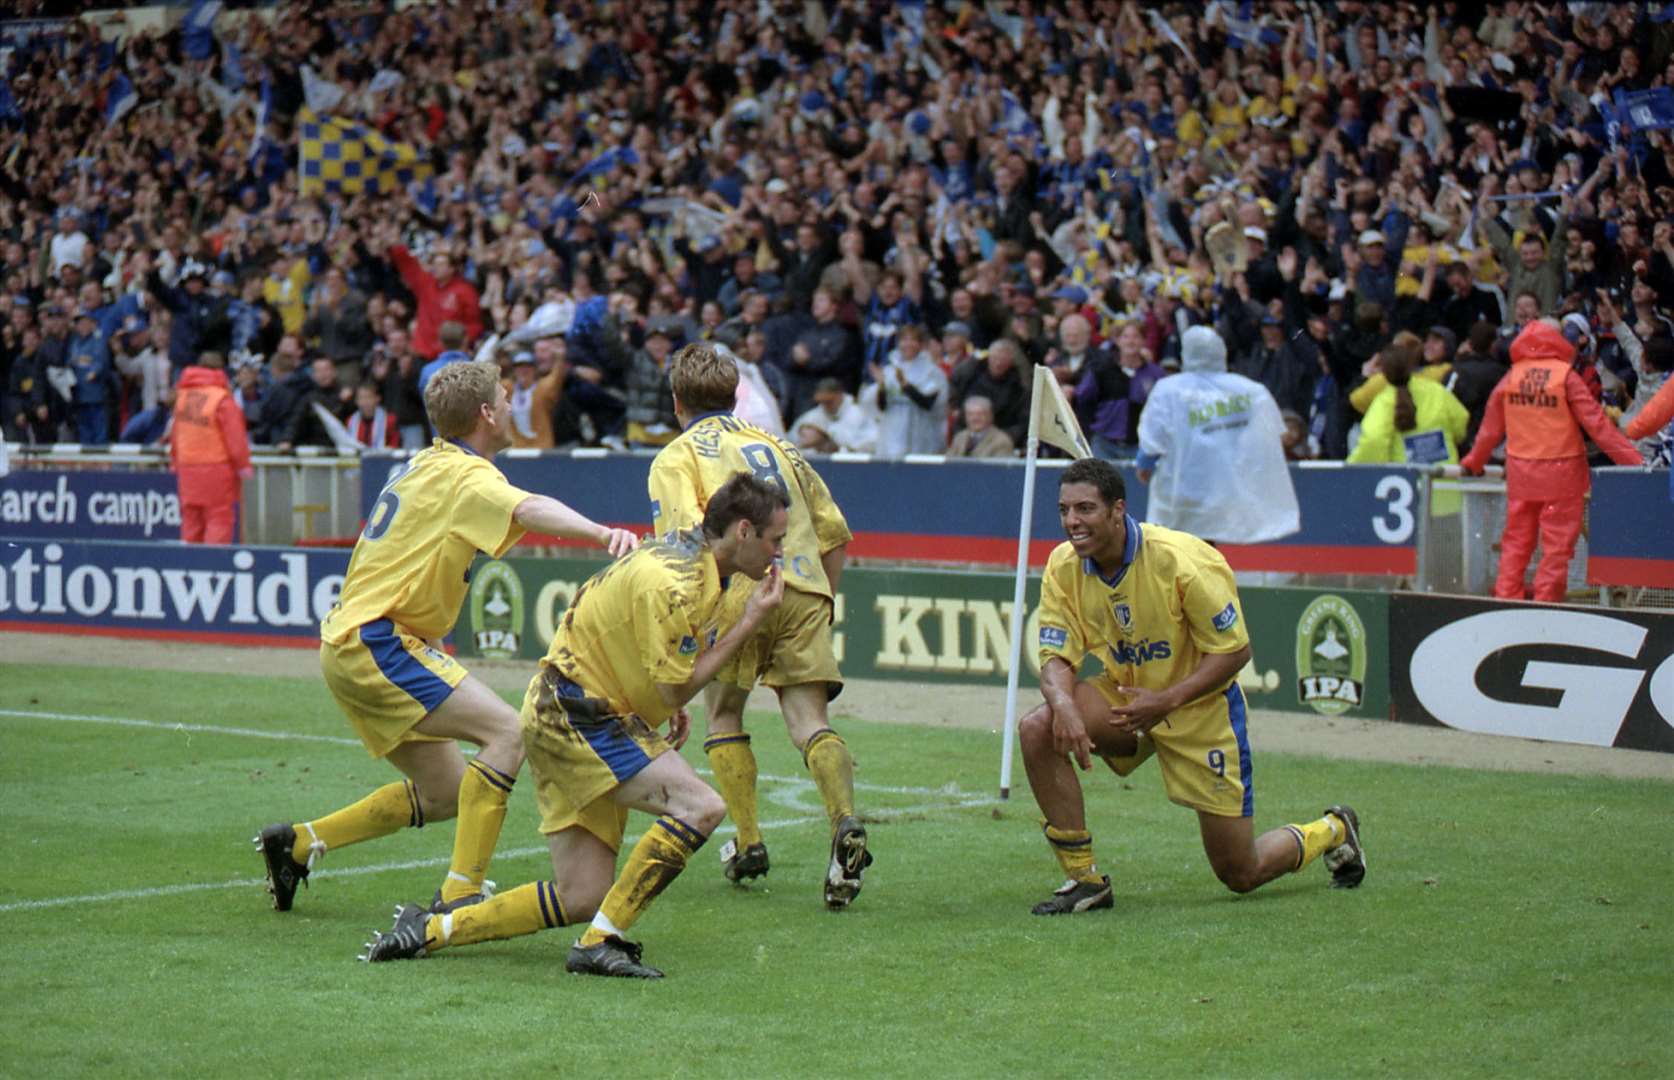 Andy Thomson celebrates his goal at Wembley with team-mates